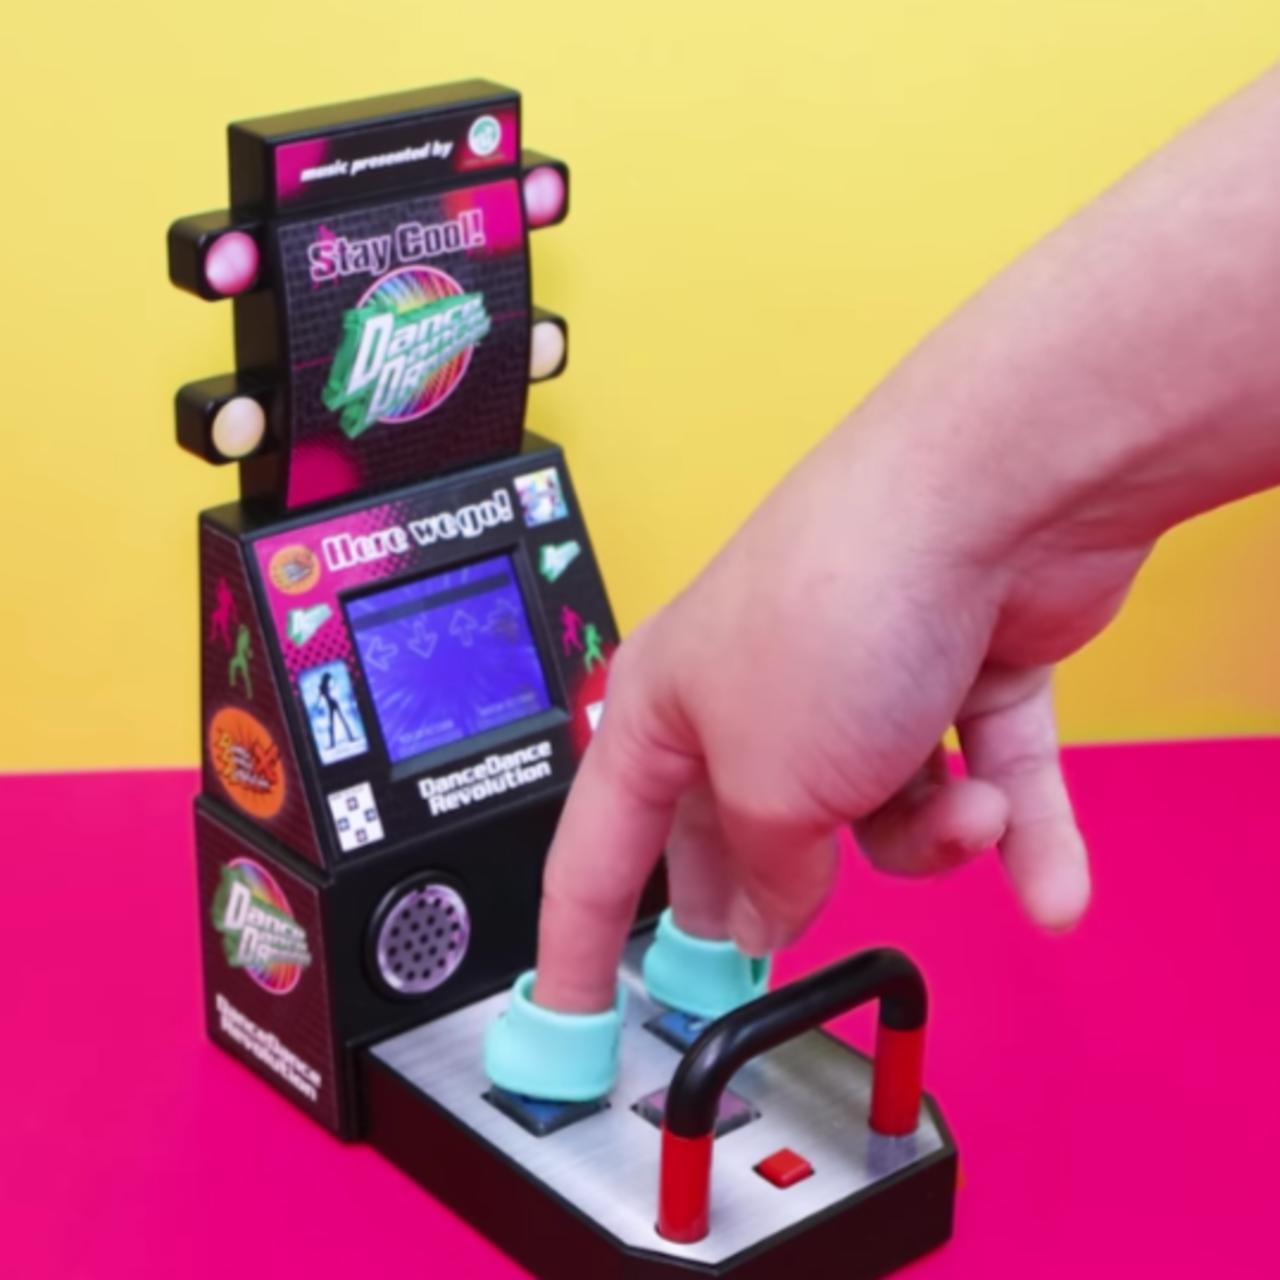 This is a tiny Dance Dance Revolution game for your fingers!